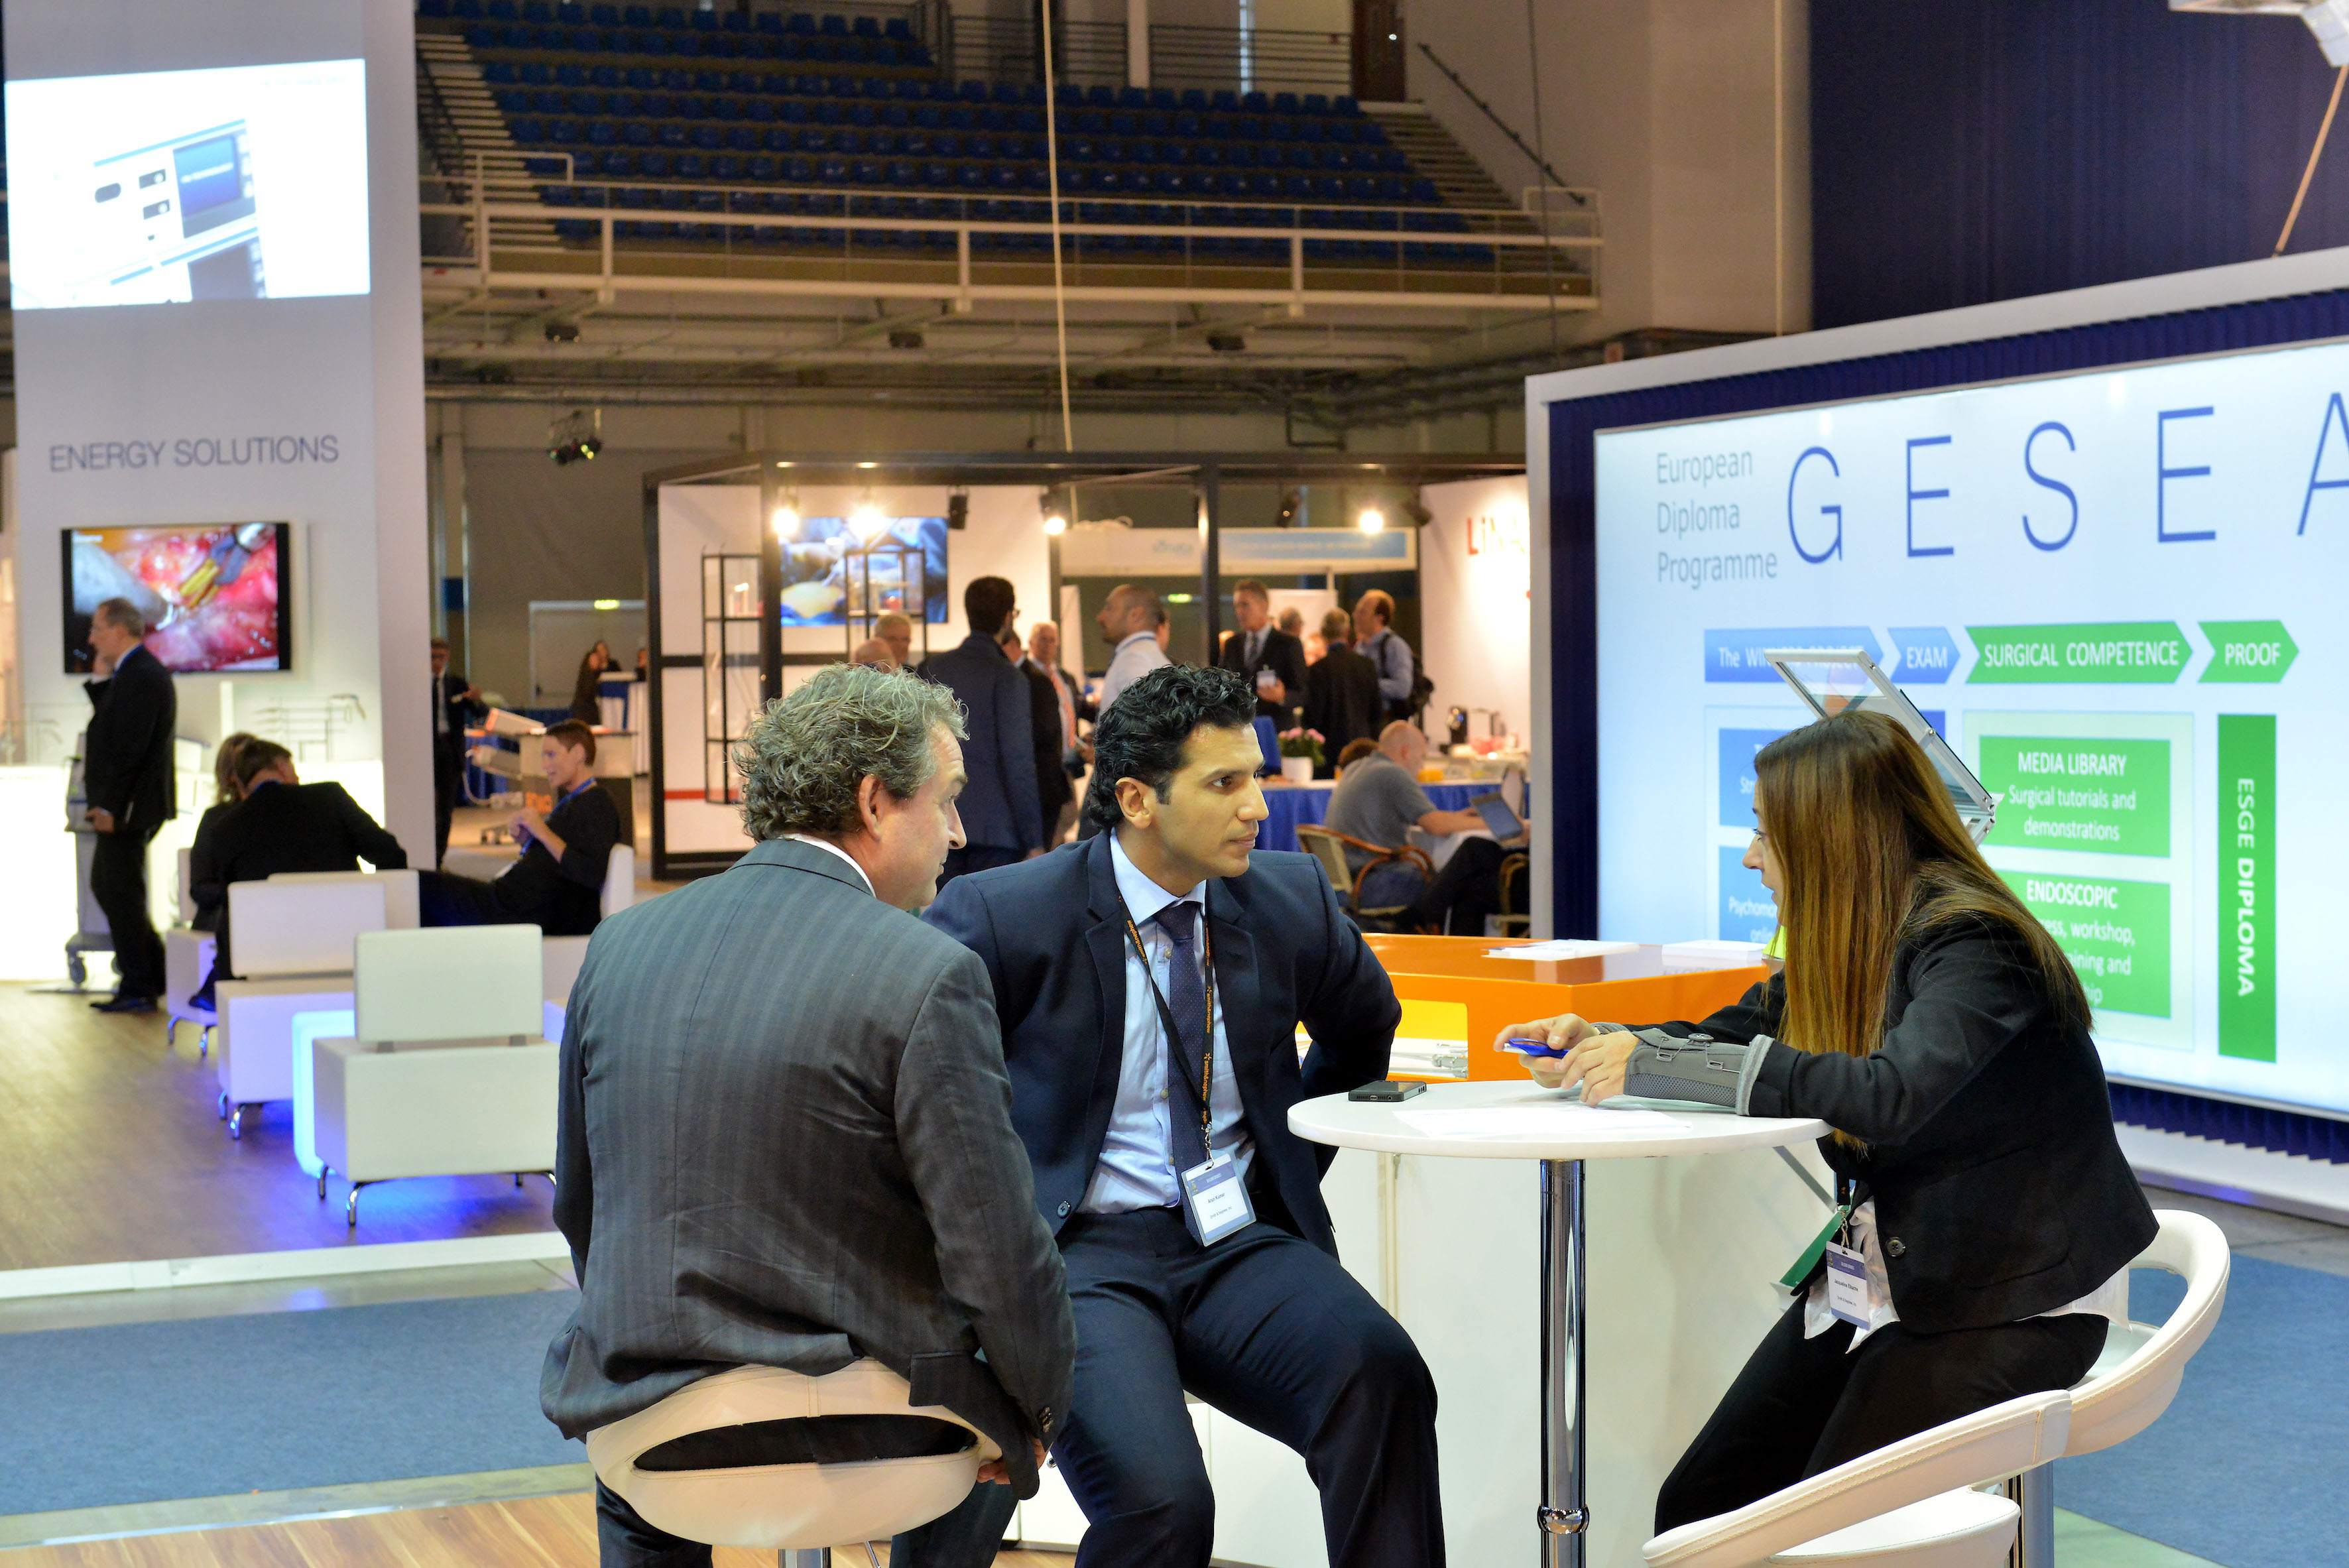 Budapest industry stand / ESGE congress 2015